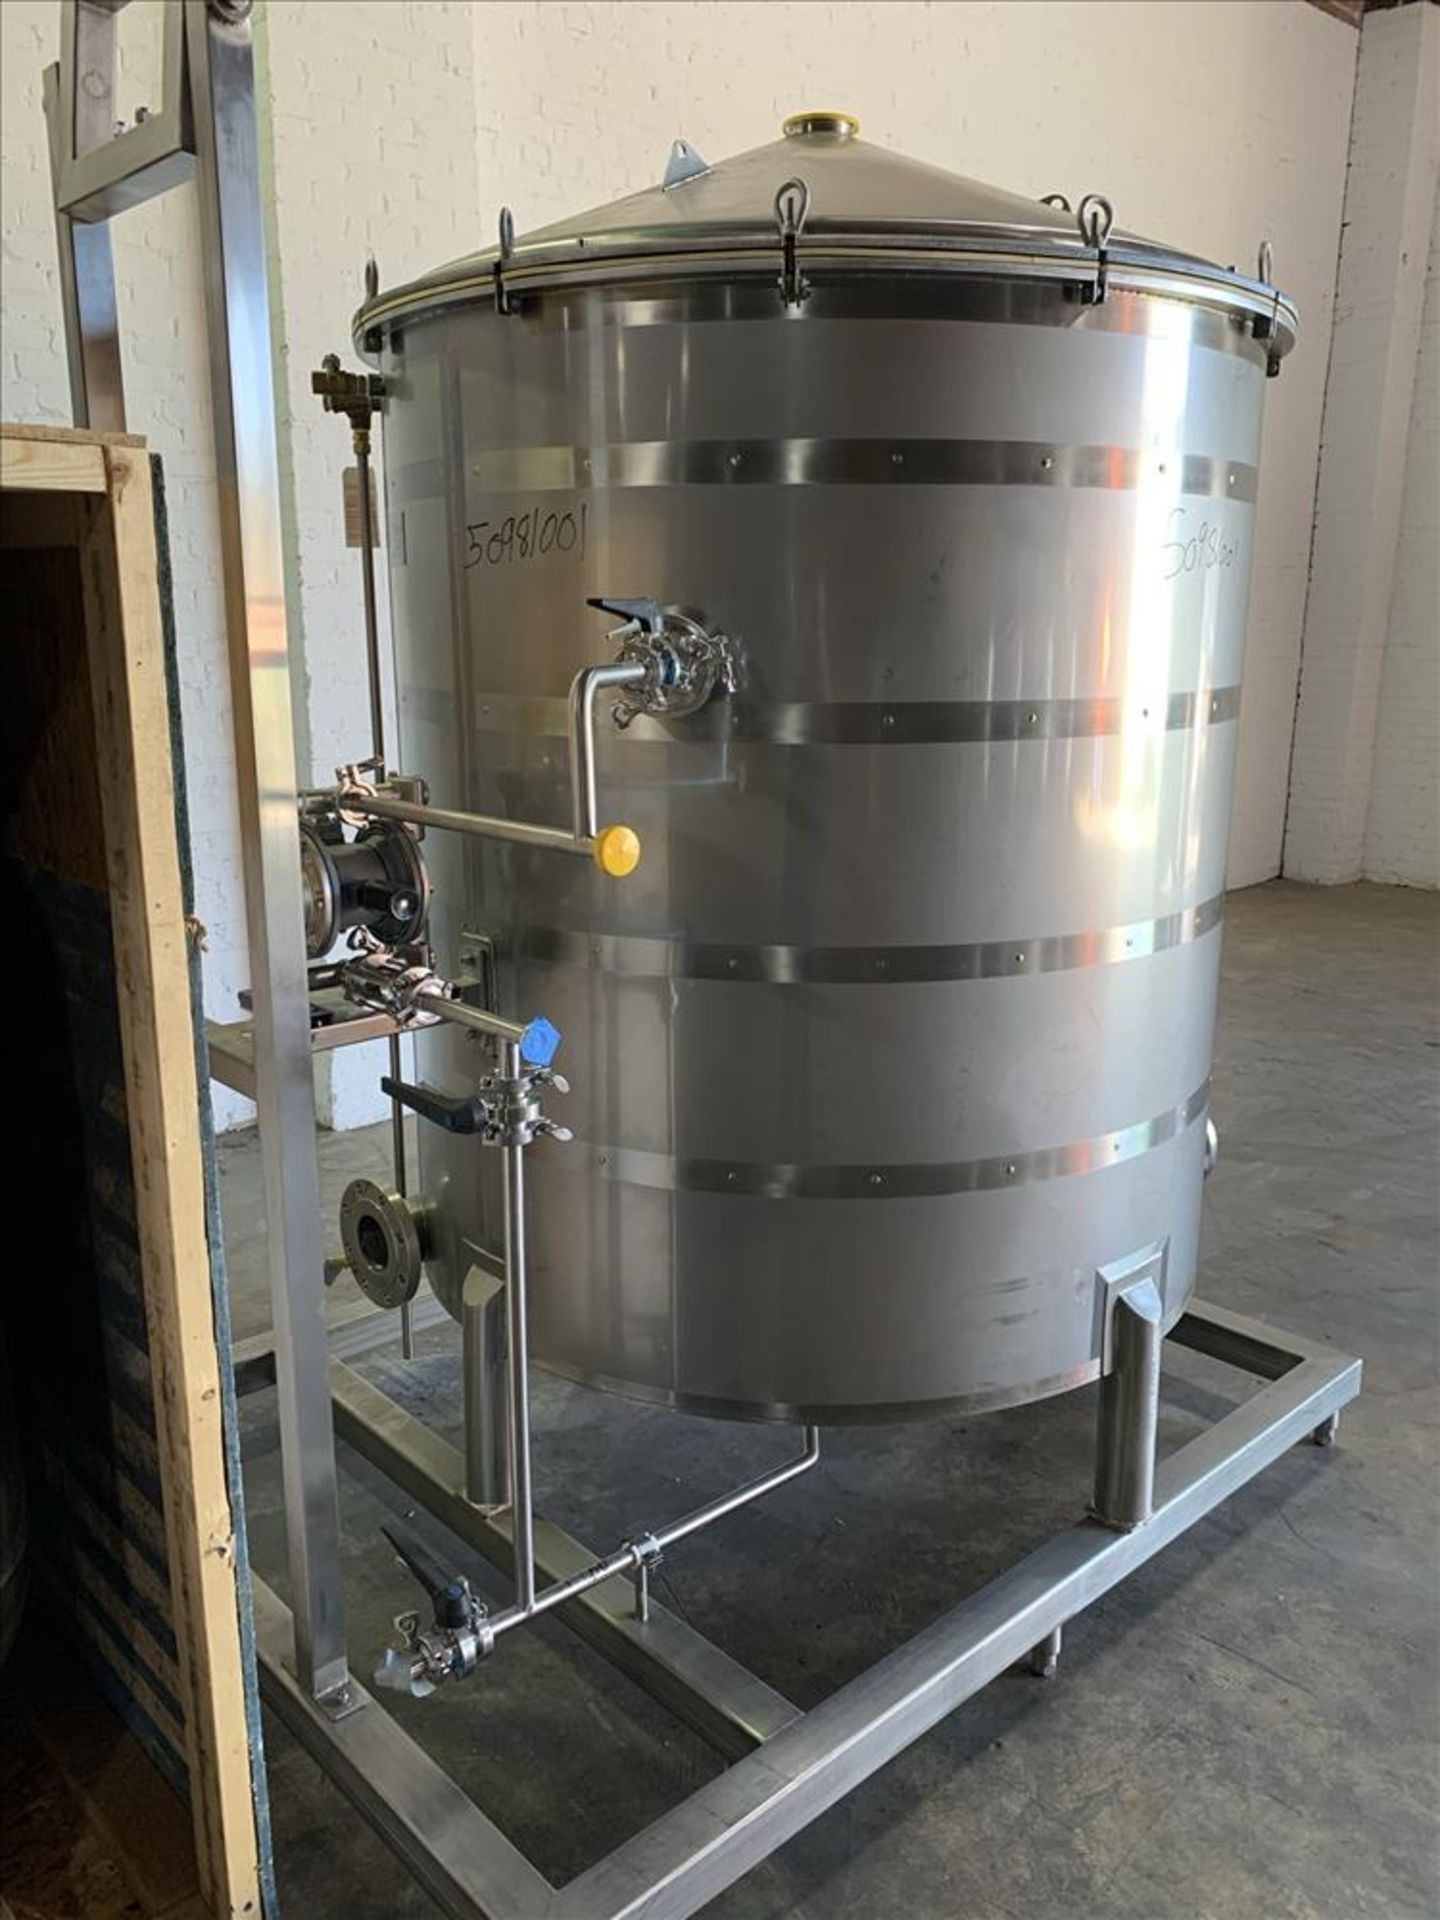 New In Crates - Eden Labs LLC Industrial 500 Gallon Performance Solvent Recovery System - Image 20 of 152